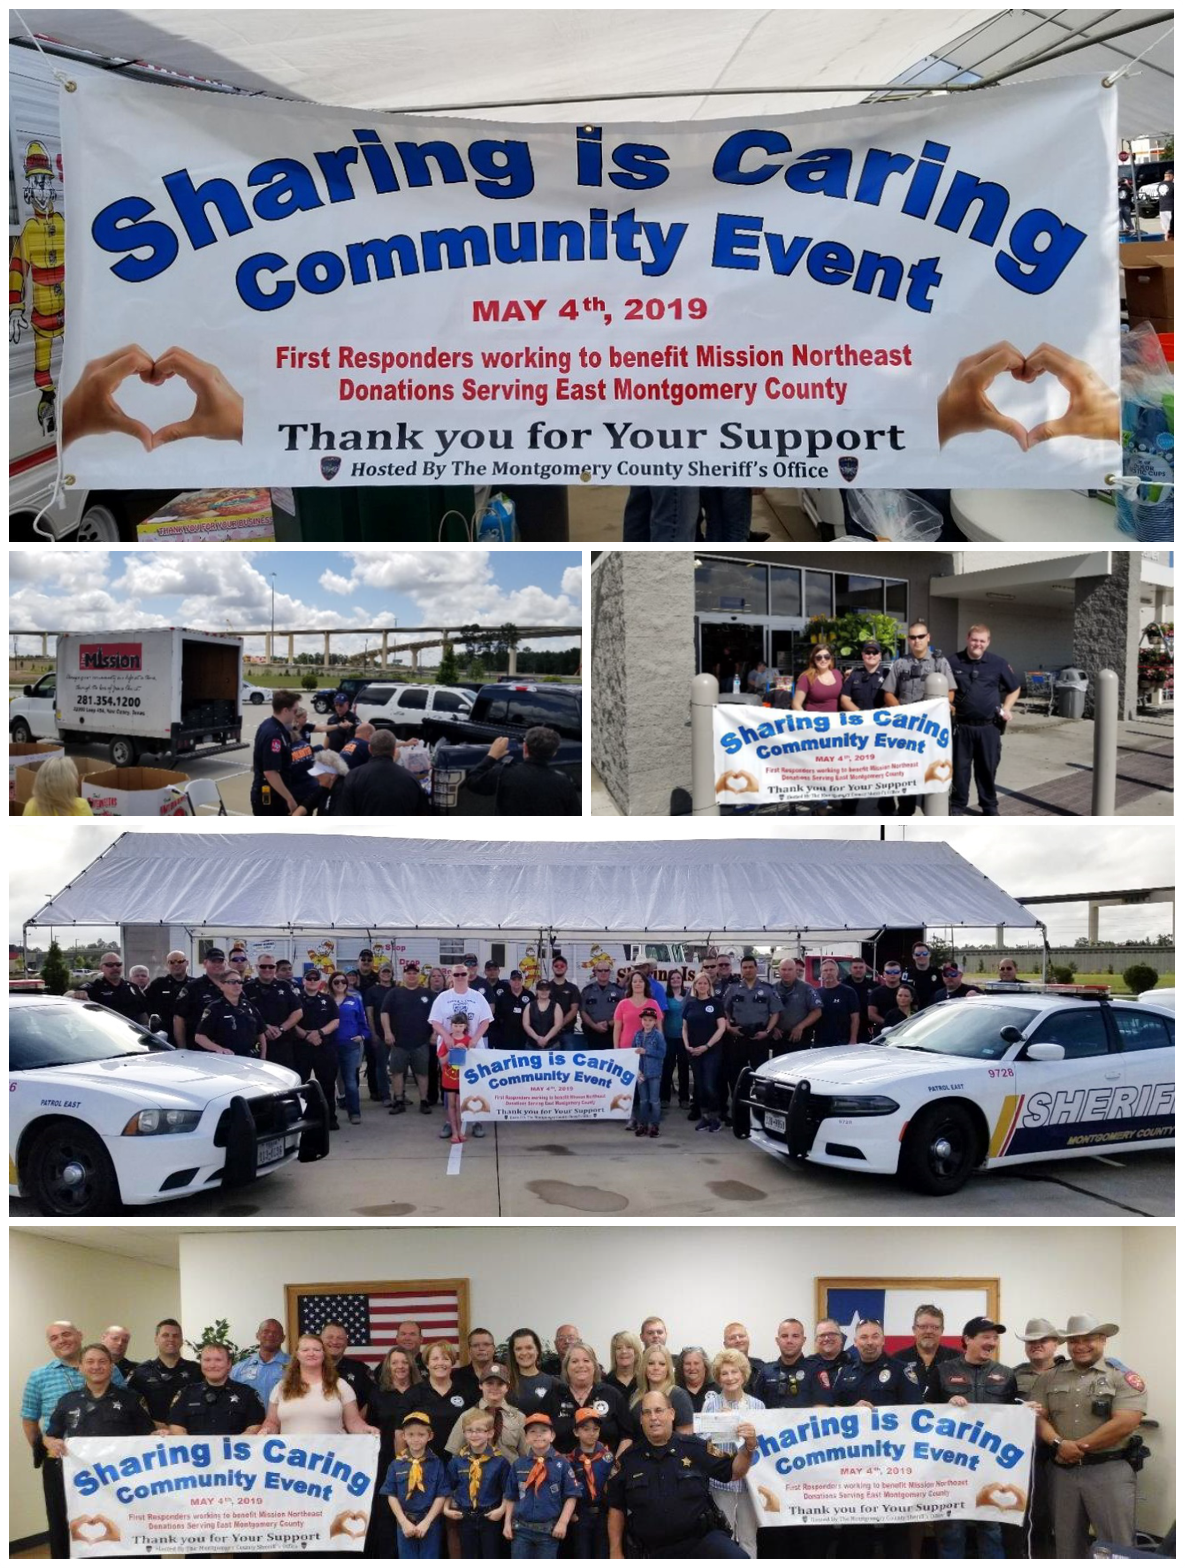 Photo collage of Sharing is Caring banner and group photos of Montgomery County Sheriff's Office Deputies and Local Community.